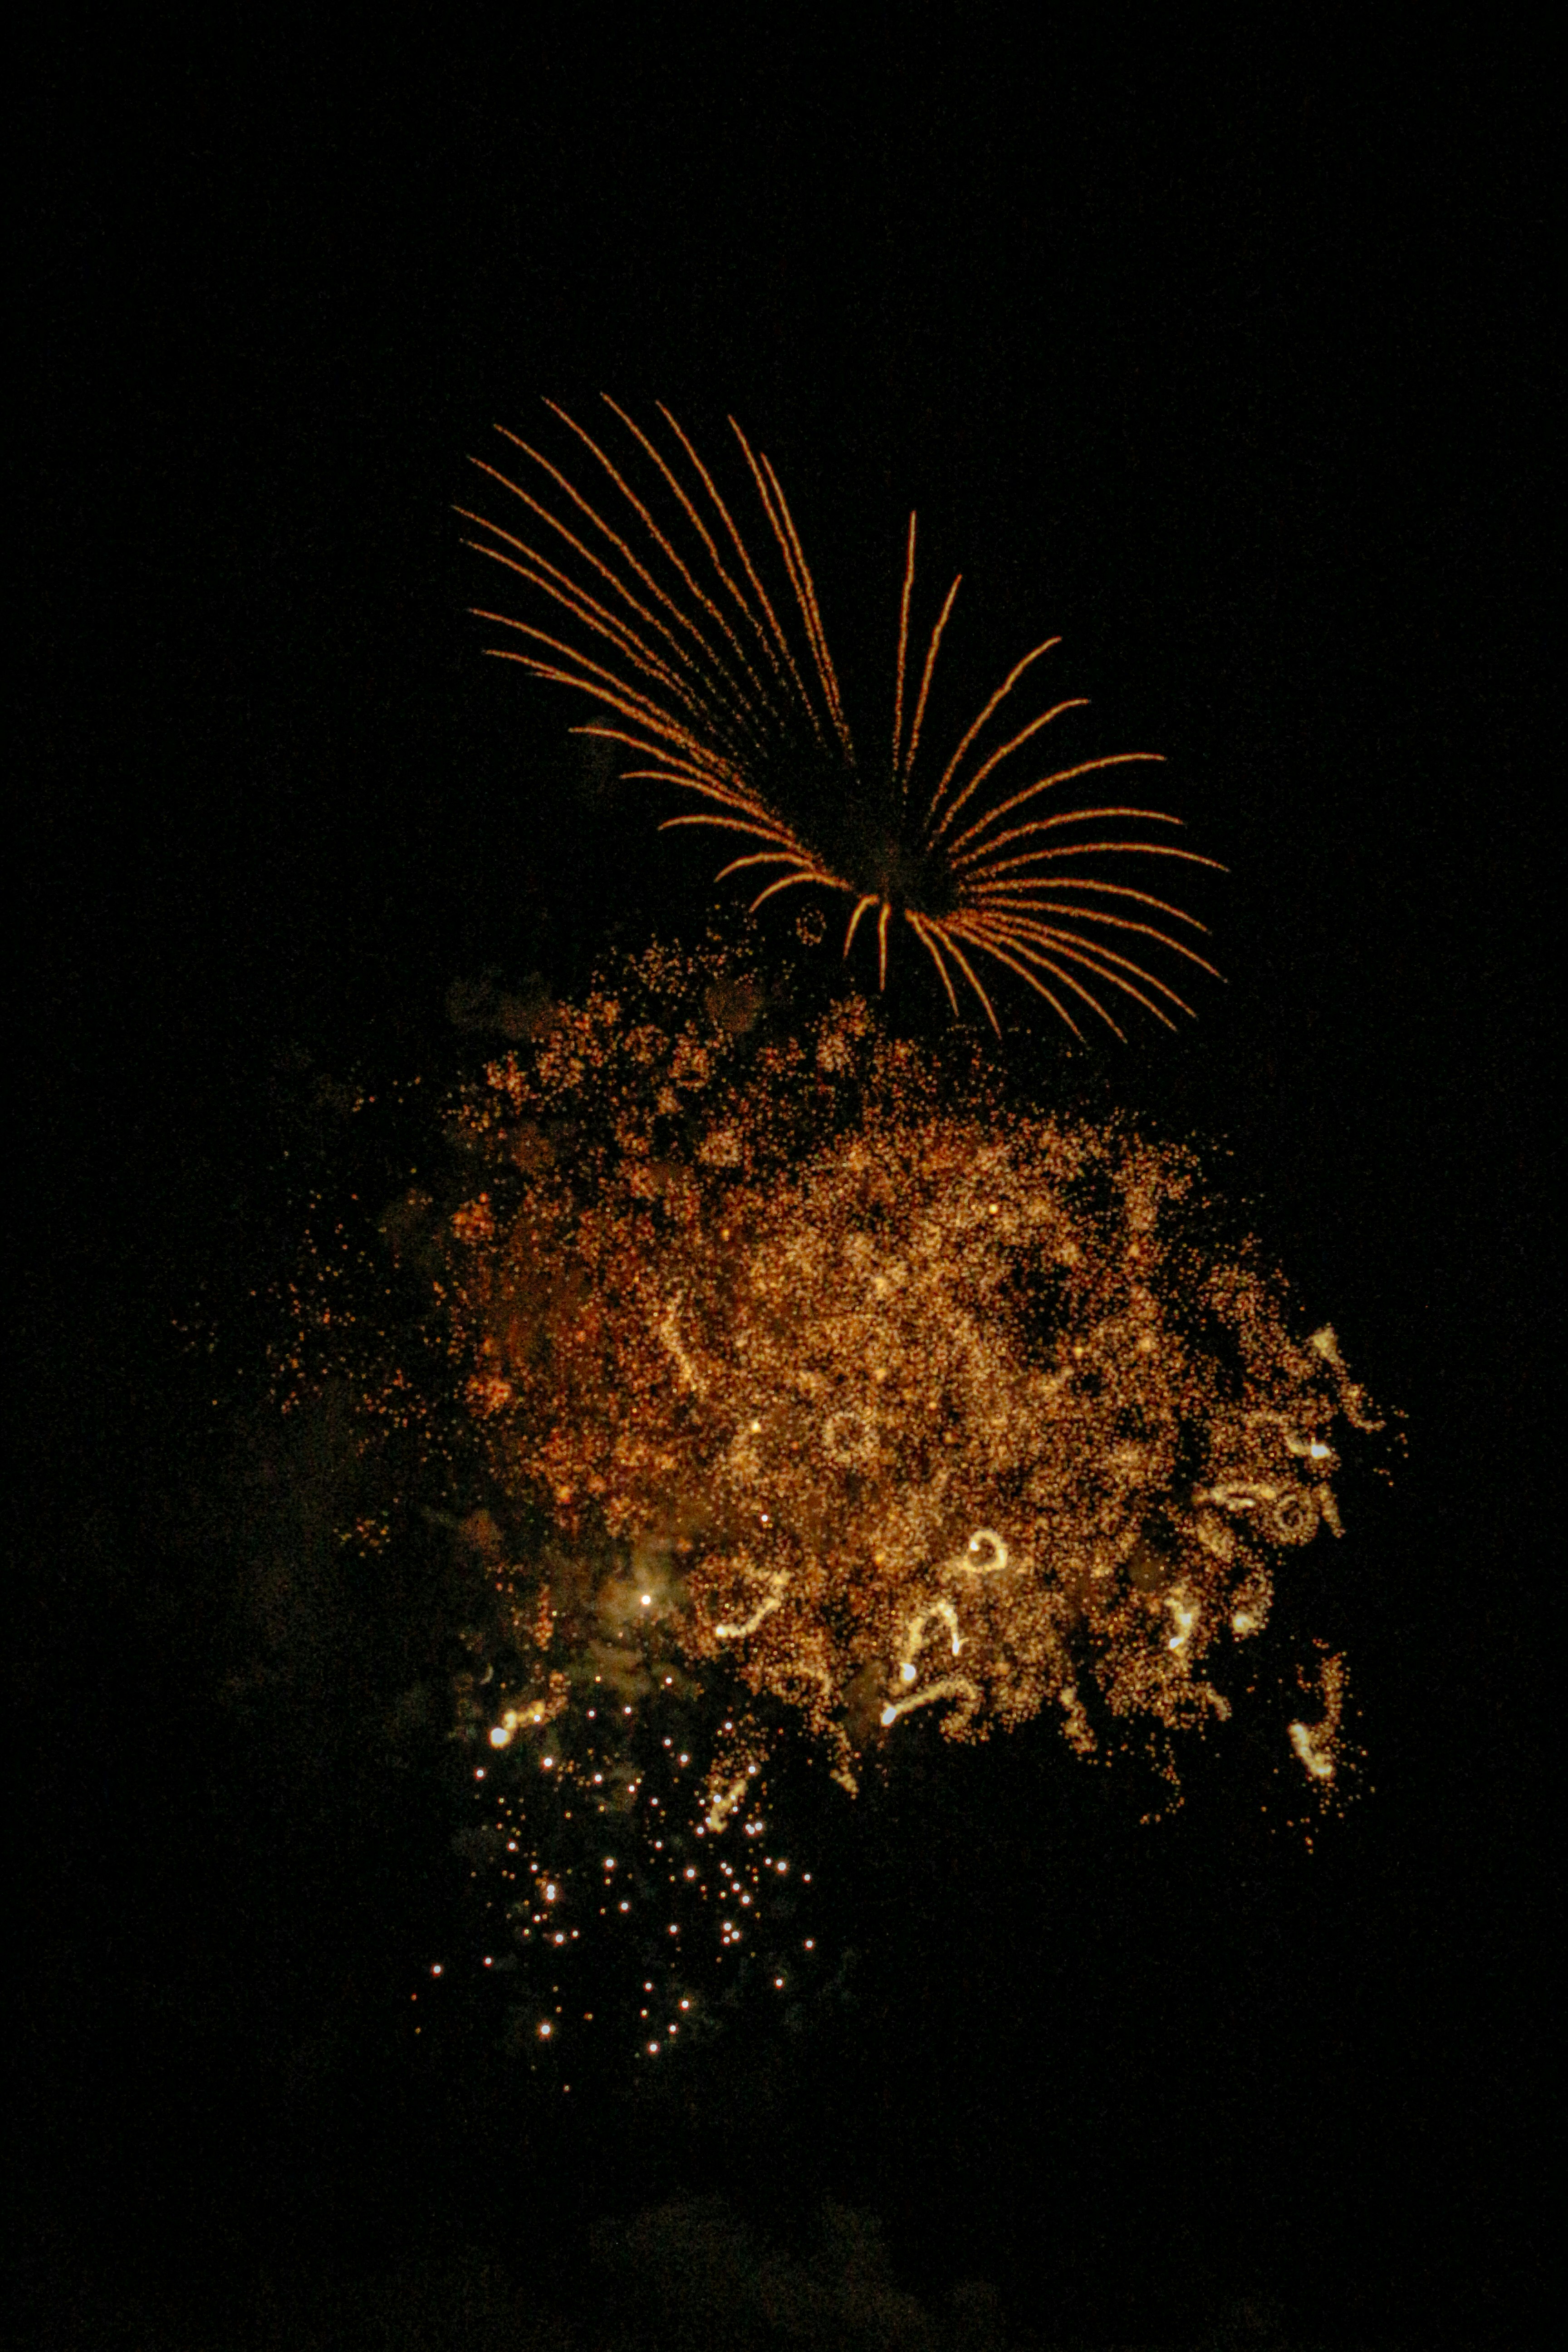 orange fireworks in the sky during night time